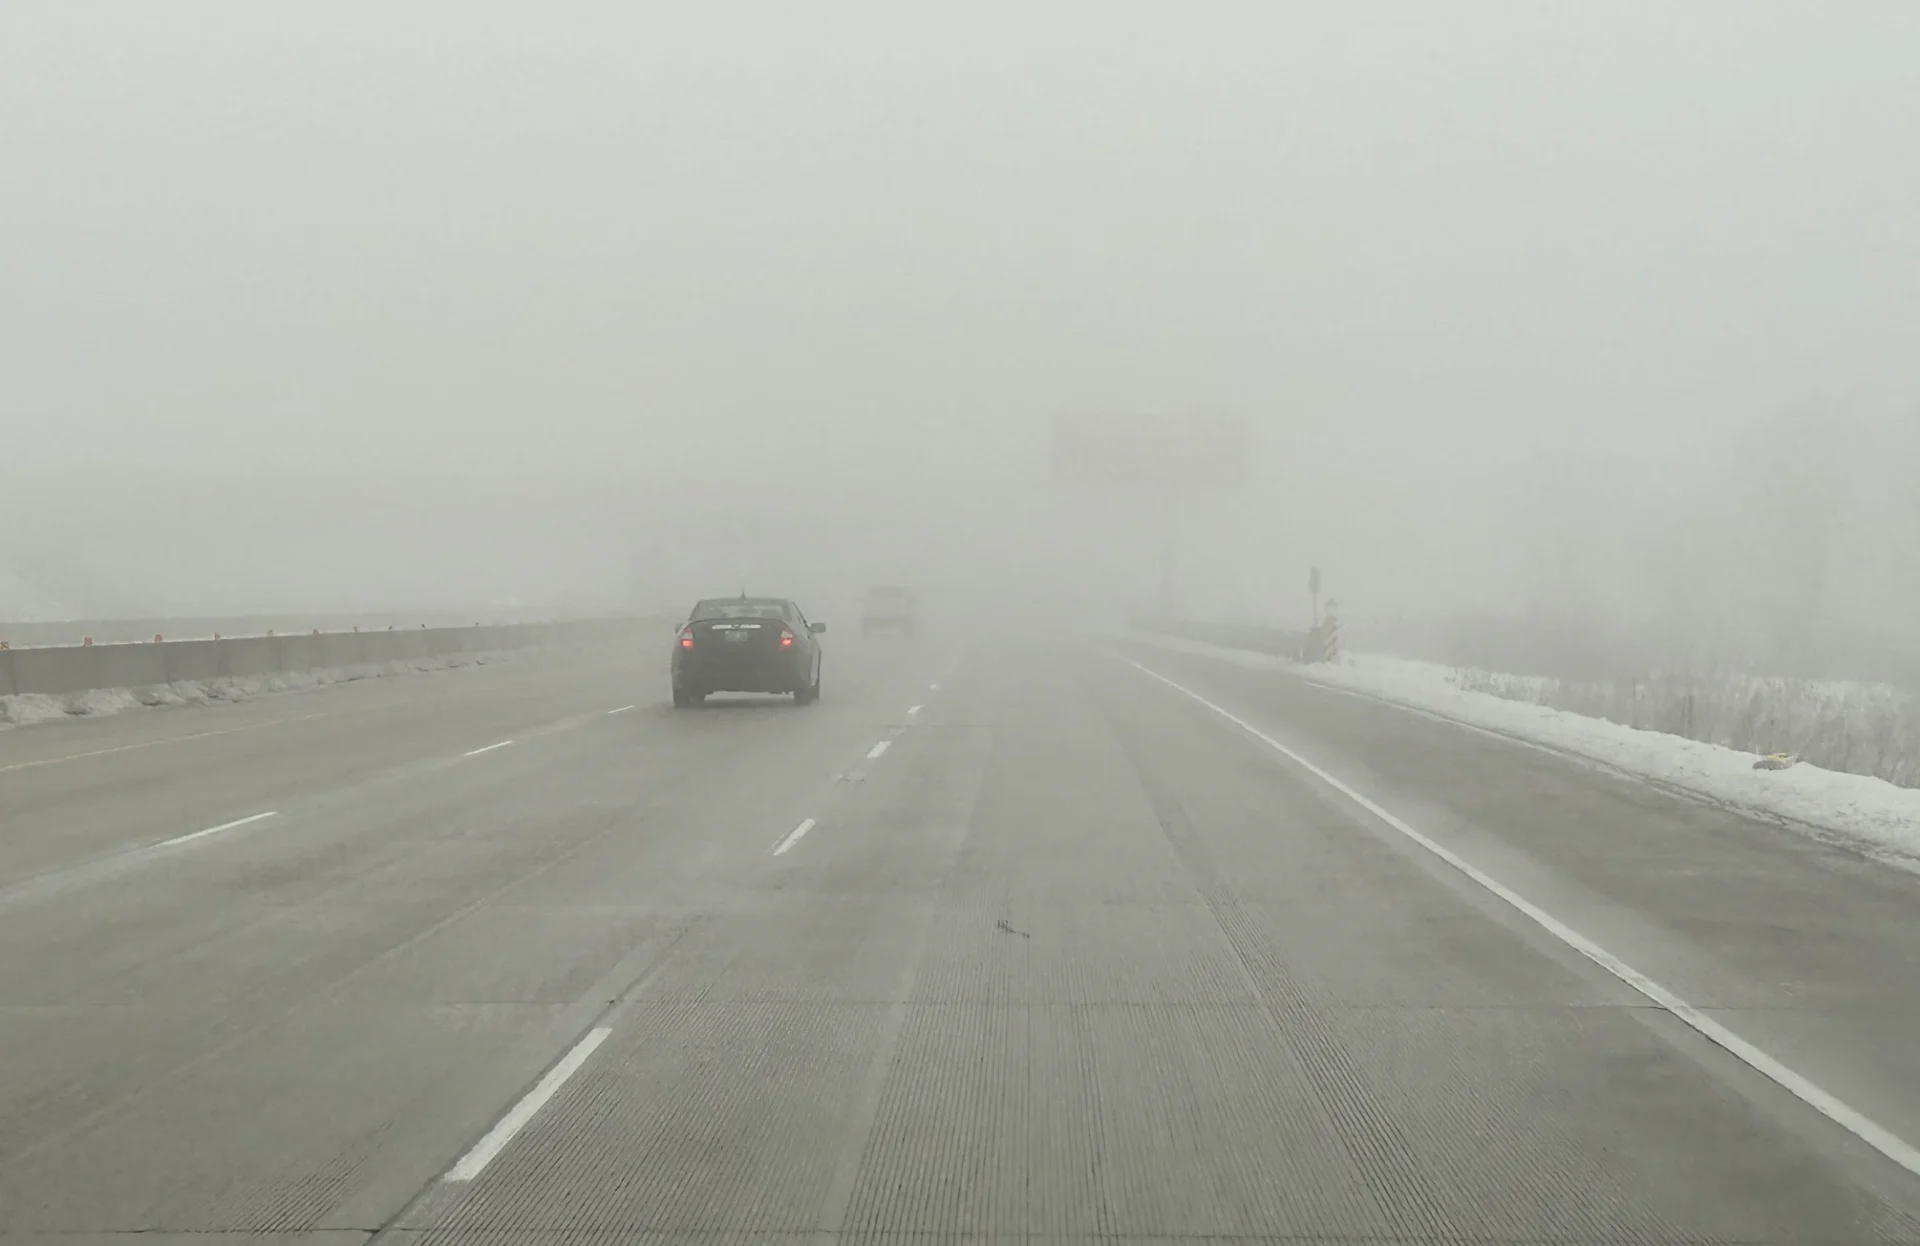 Follow these tips for staying safe while driving in thick fog